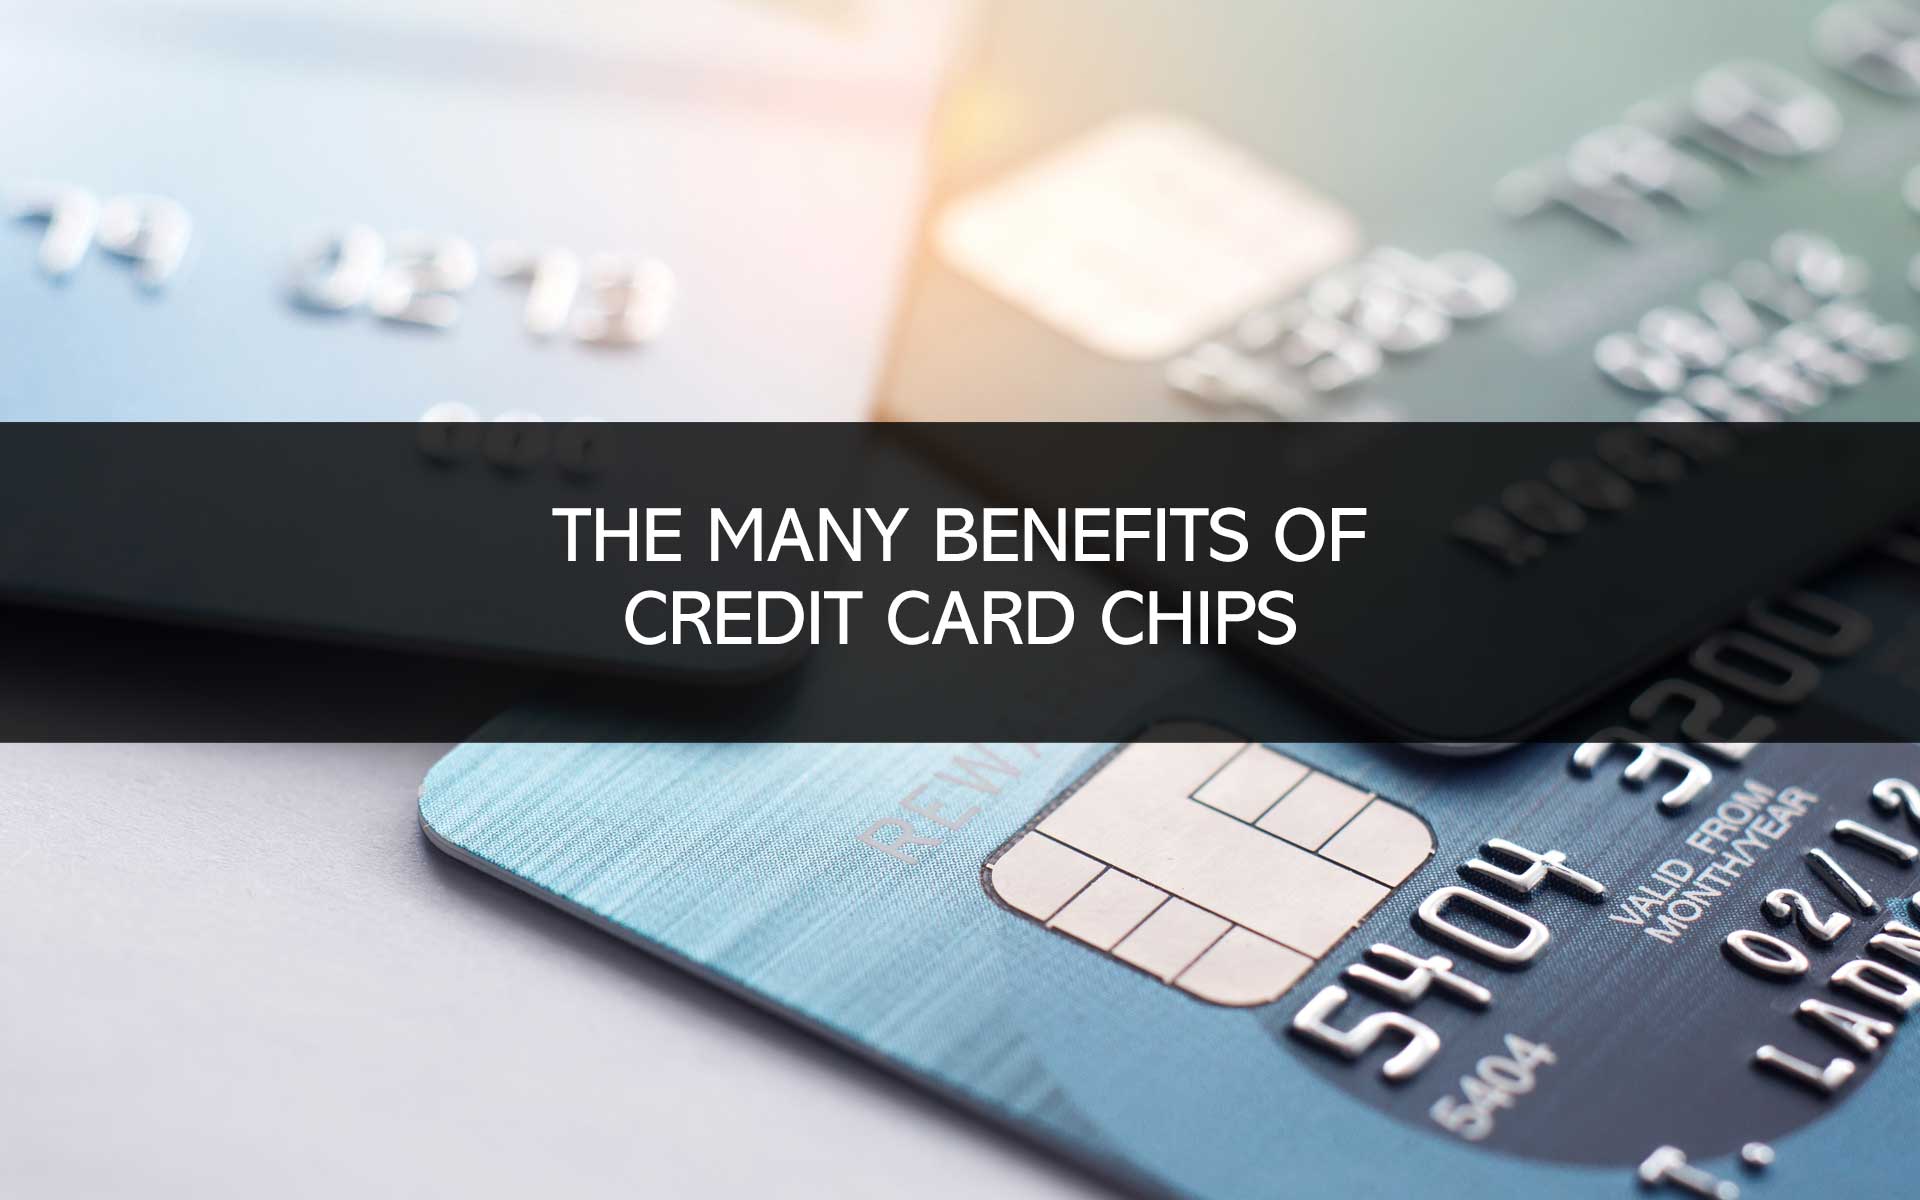 The Many Benefits of Credit Card Chips